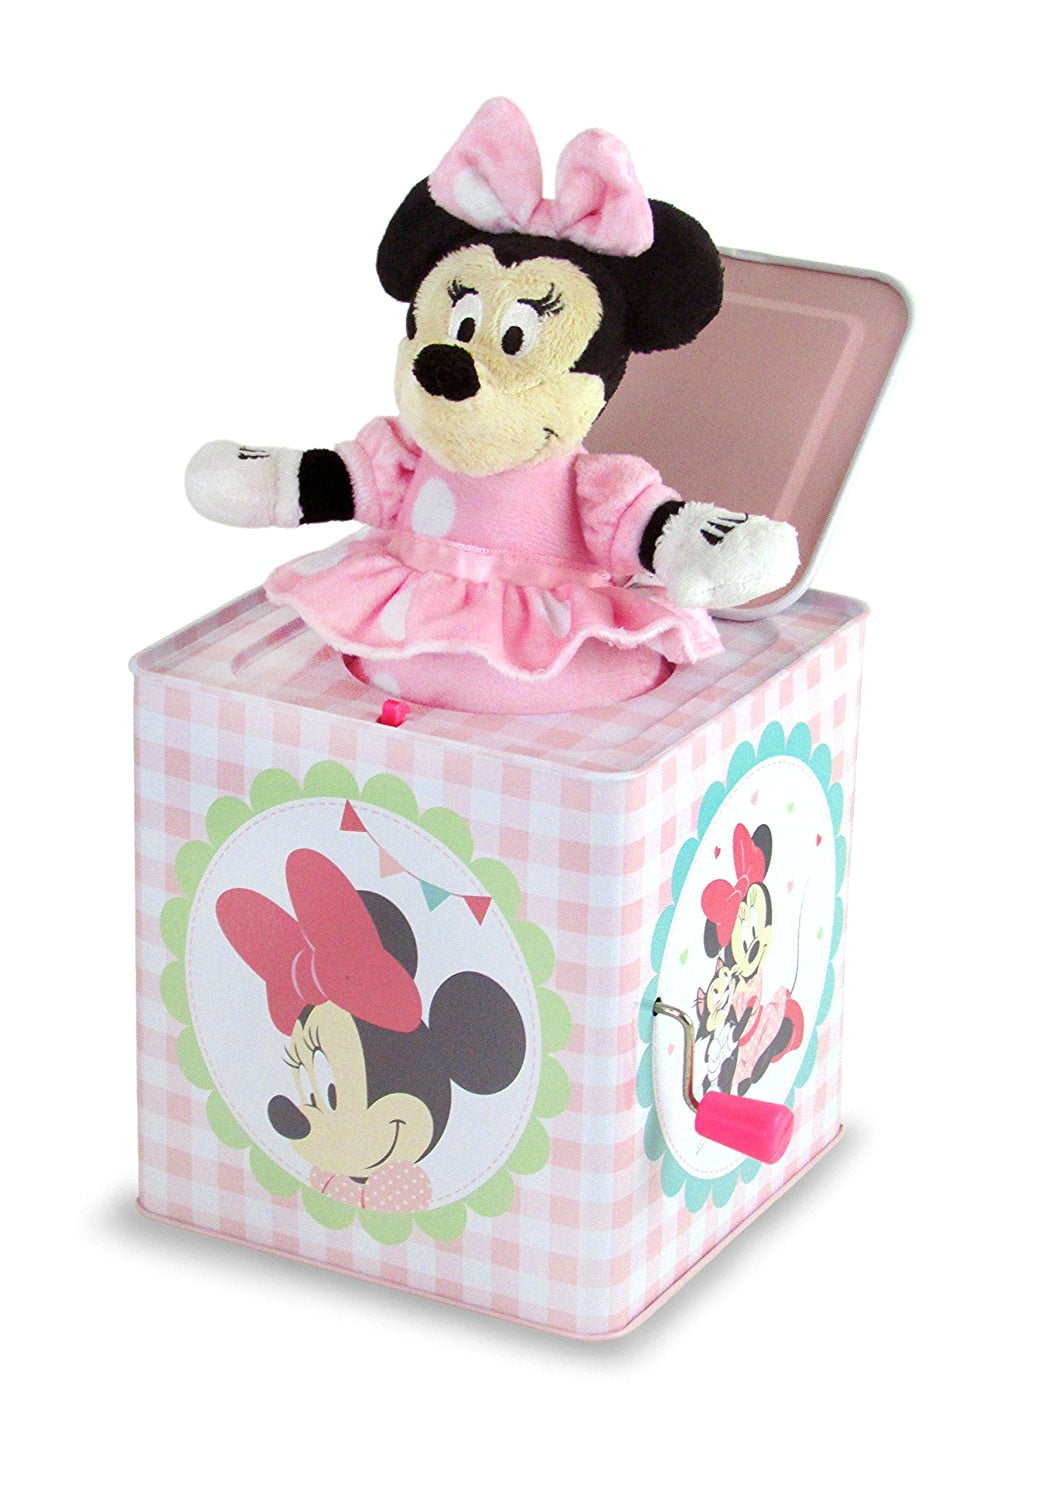 6.25 6.25 79708 Disney Baby Minnie Mouse Jack-in-the-Box